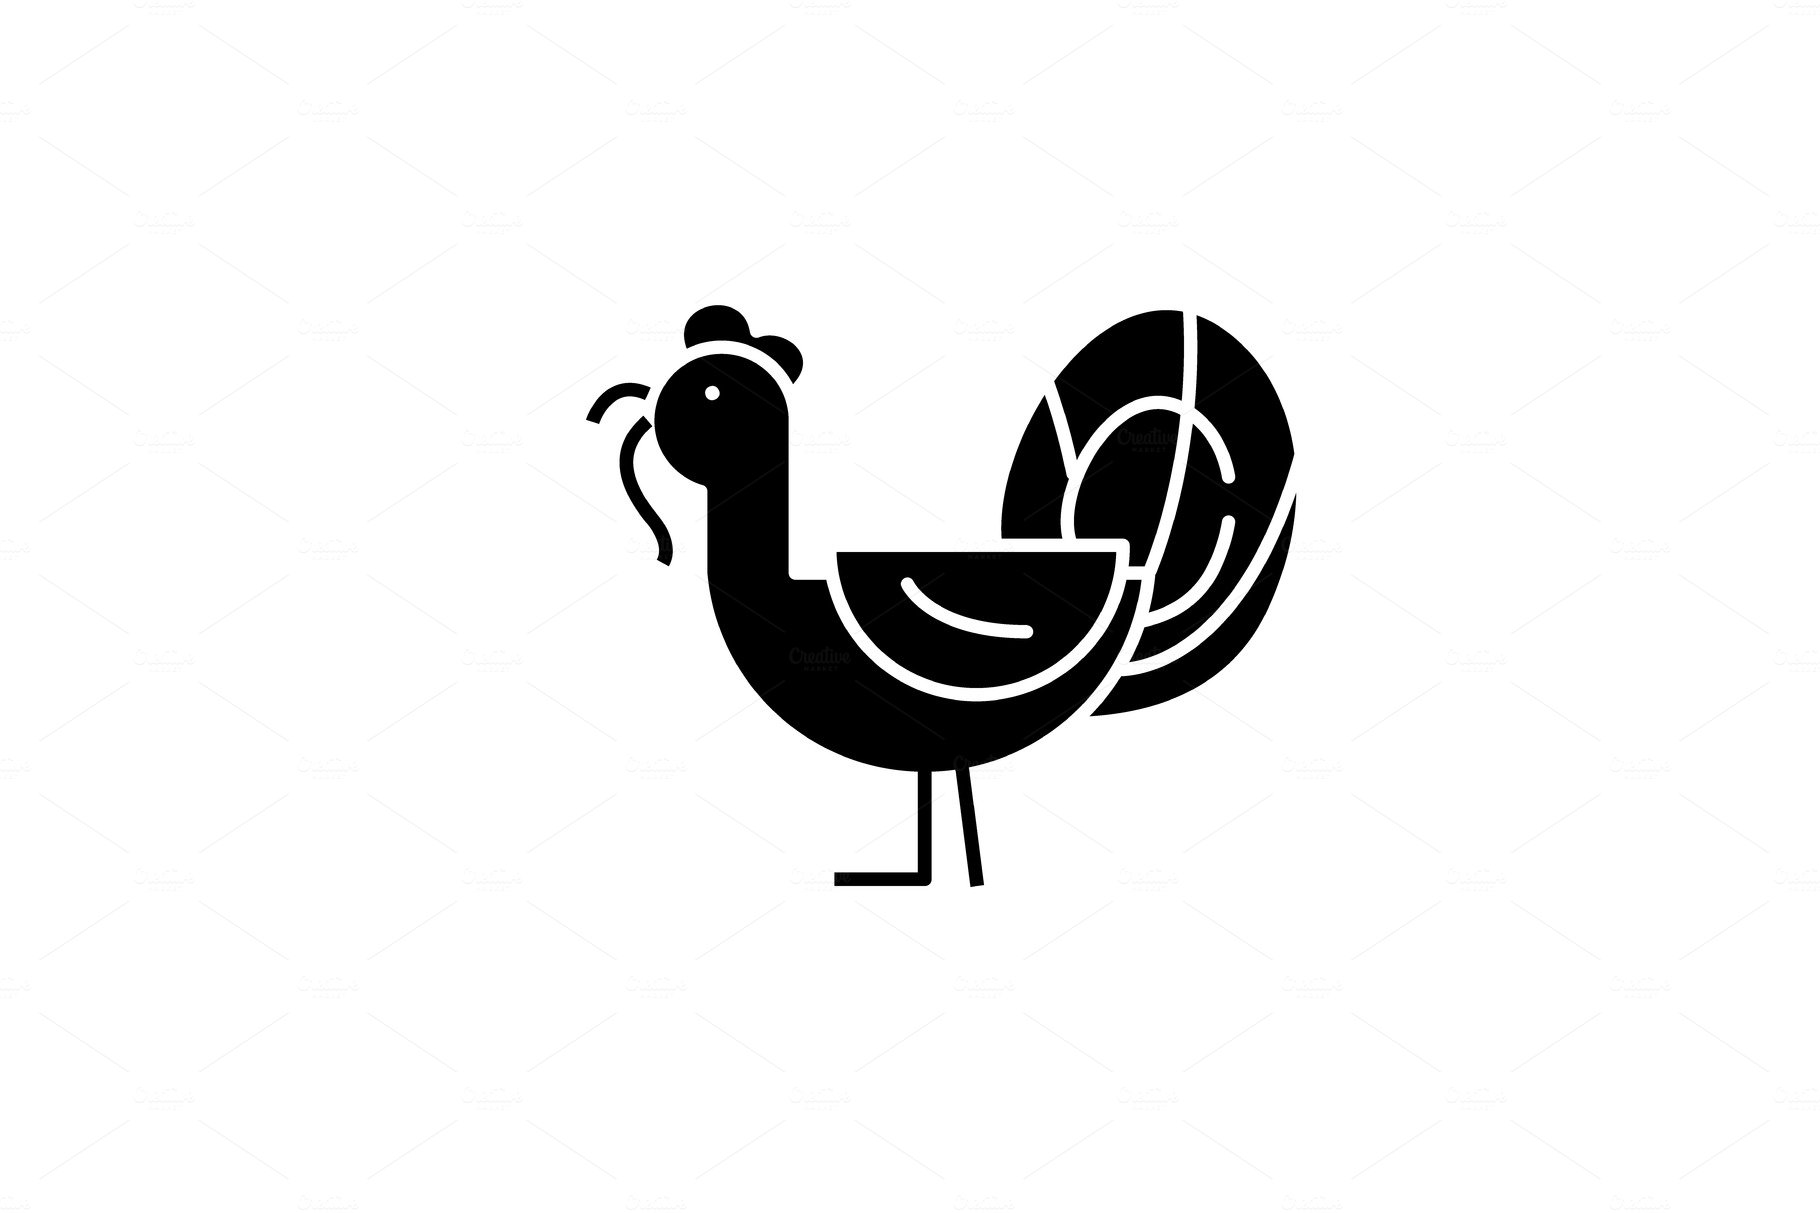 Turkey black icon, vector sign on cover image.